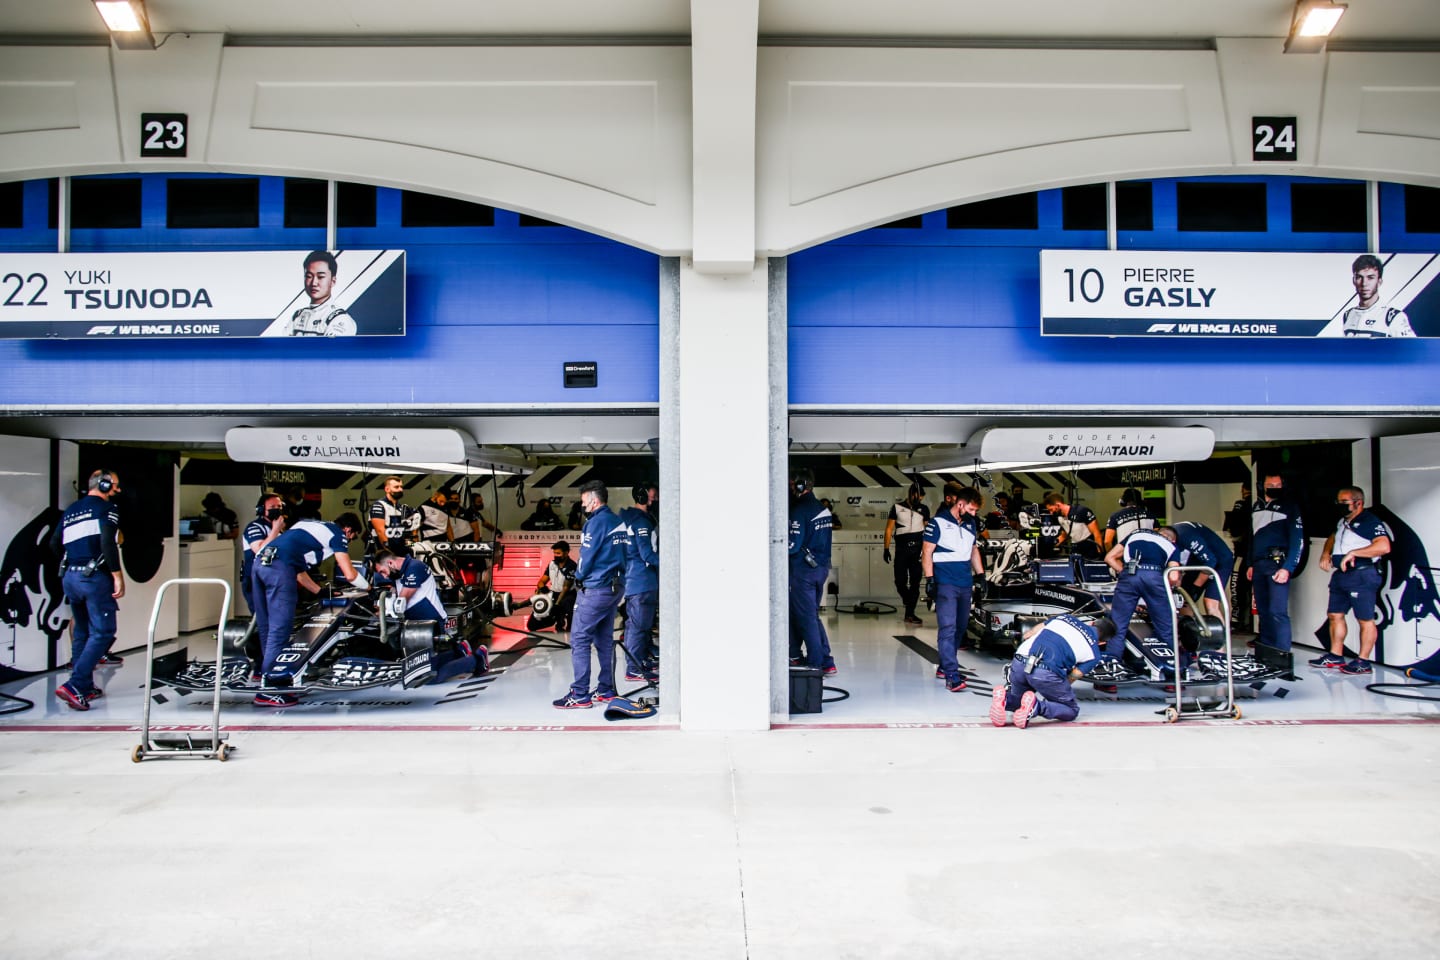 ISTANBUL, TURKEY - OCTOBER 08: Scuderia AlphaTauri garage during practice ahead of the F1 Grand Prix of Turkey at Intercity Istanbul Park on October 08, 2021 in Istanbul, Turkey. (Photo by Peter Fox/Getty Images)